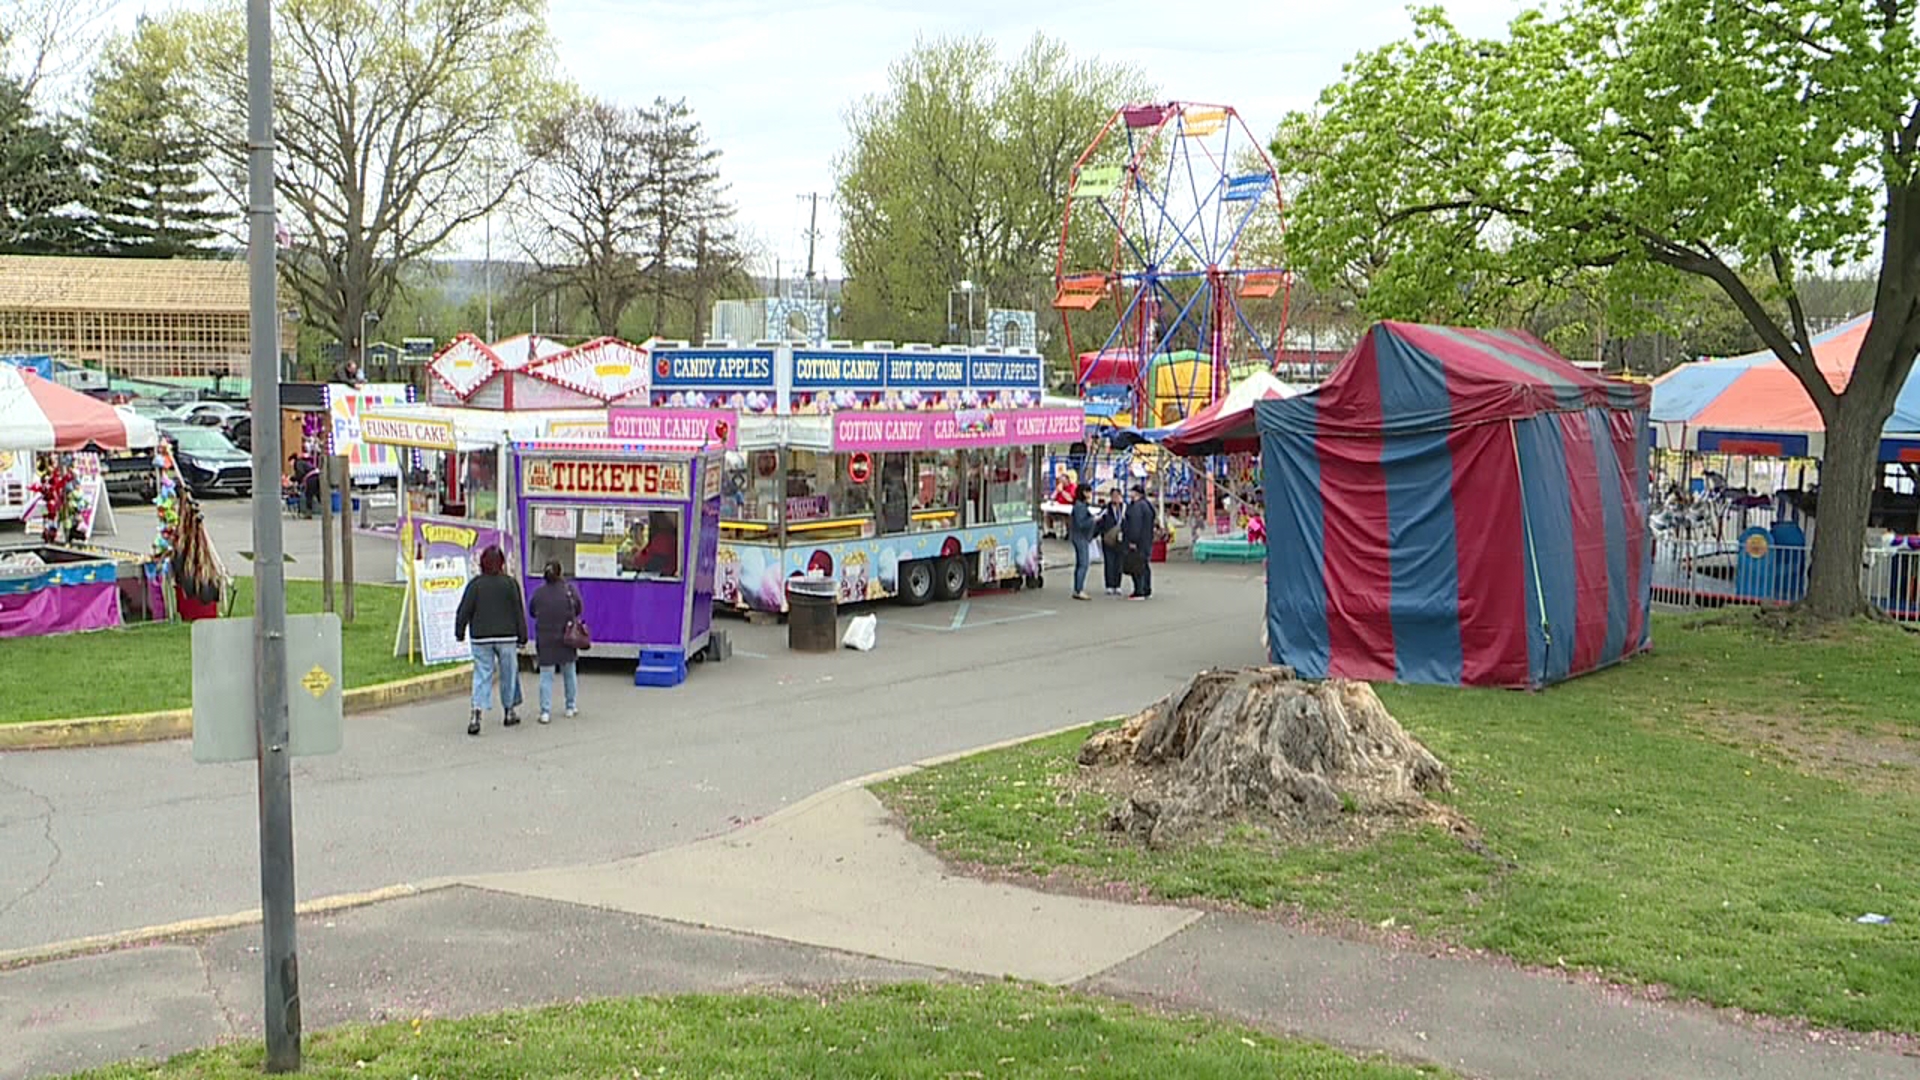 The Wilkes-Barre Cherry Blossom Festival is underway this weekend at Kirby Park from 11 a.m. to 7 p.m.